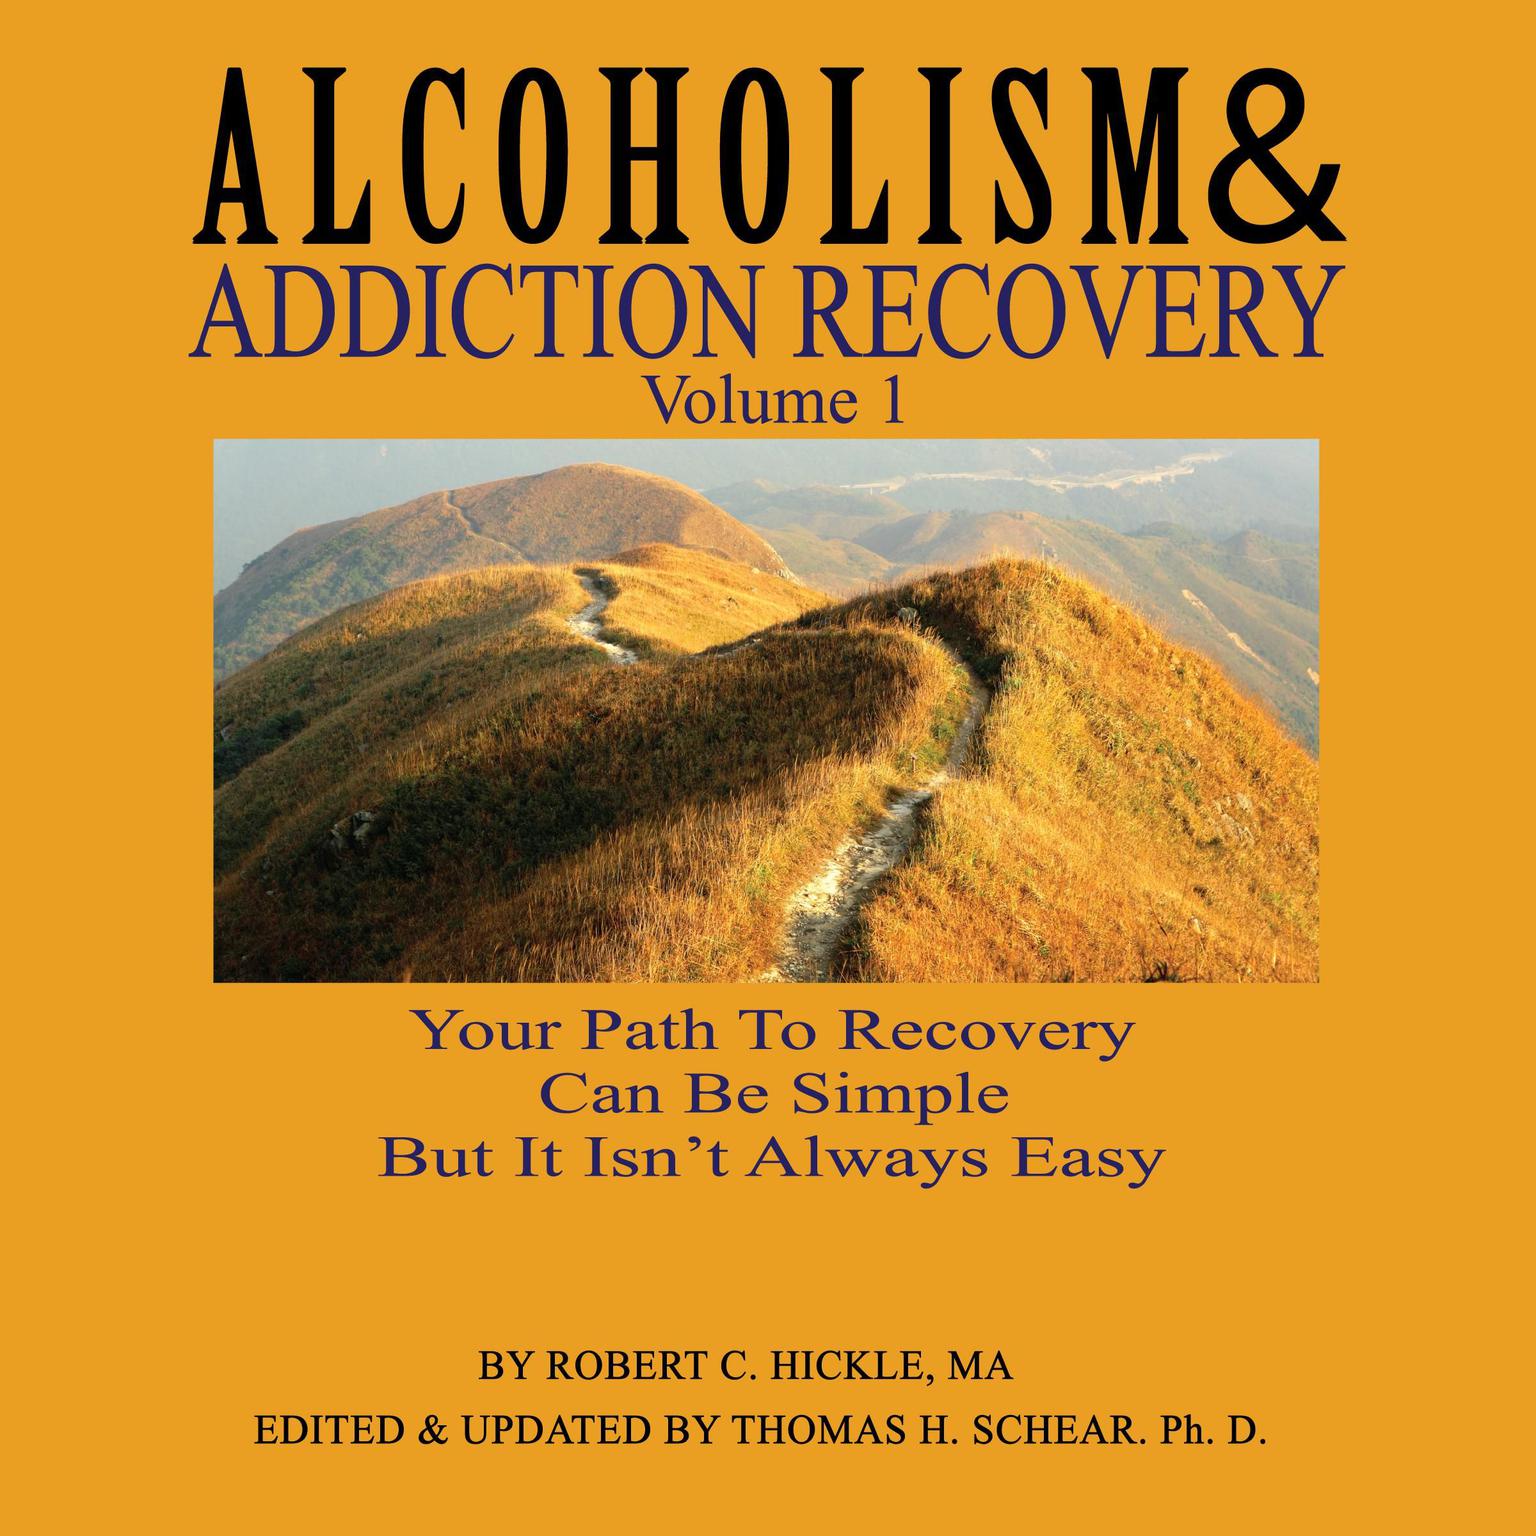 Alcoholism & Addiction Recovery: Volume 1 Audiobook, by Robert C Hickle